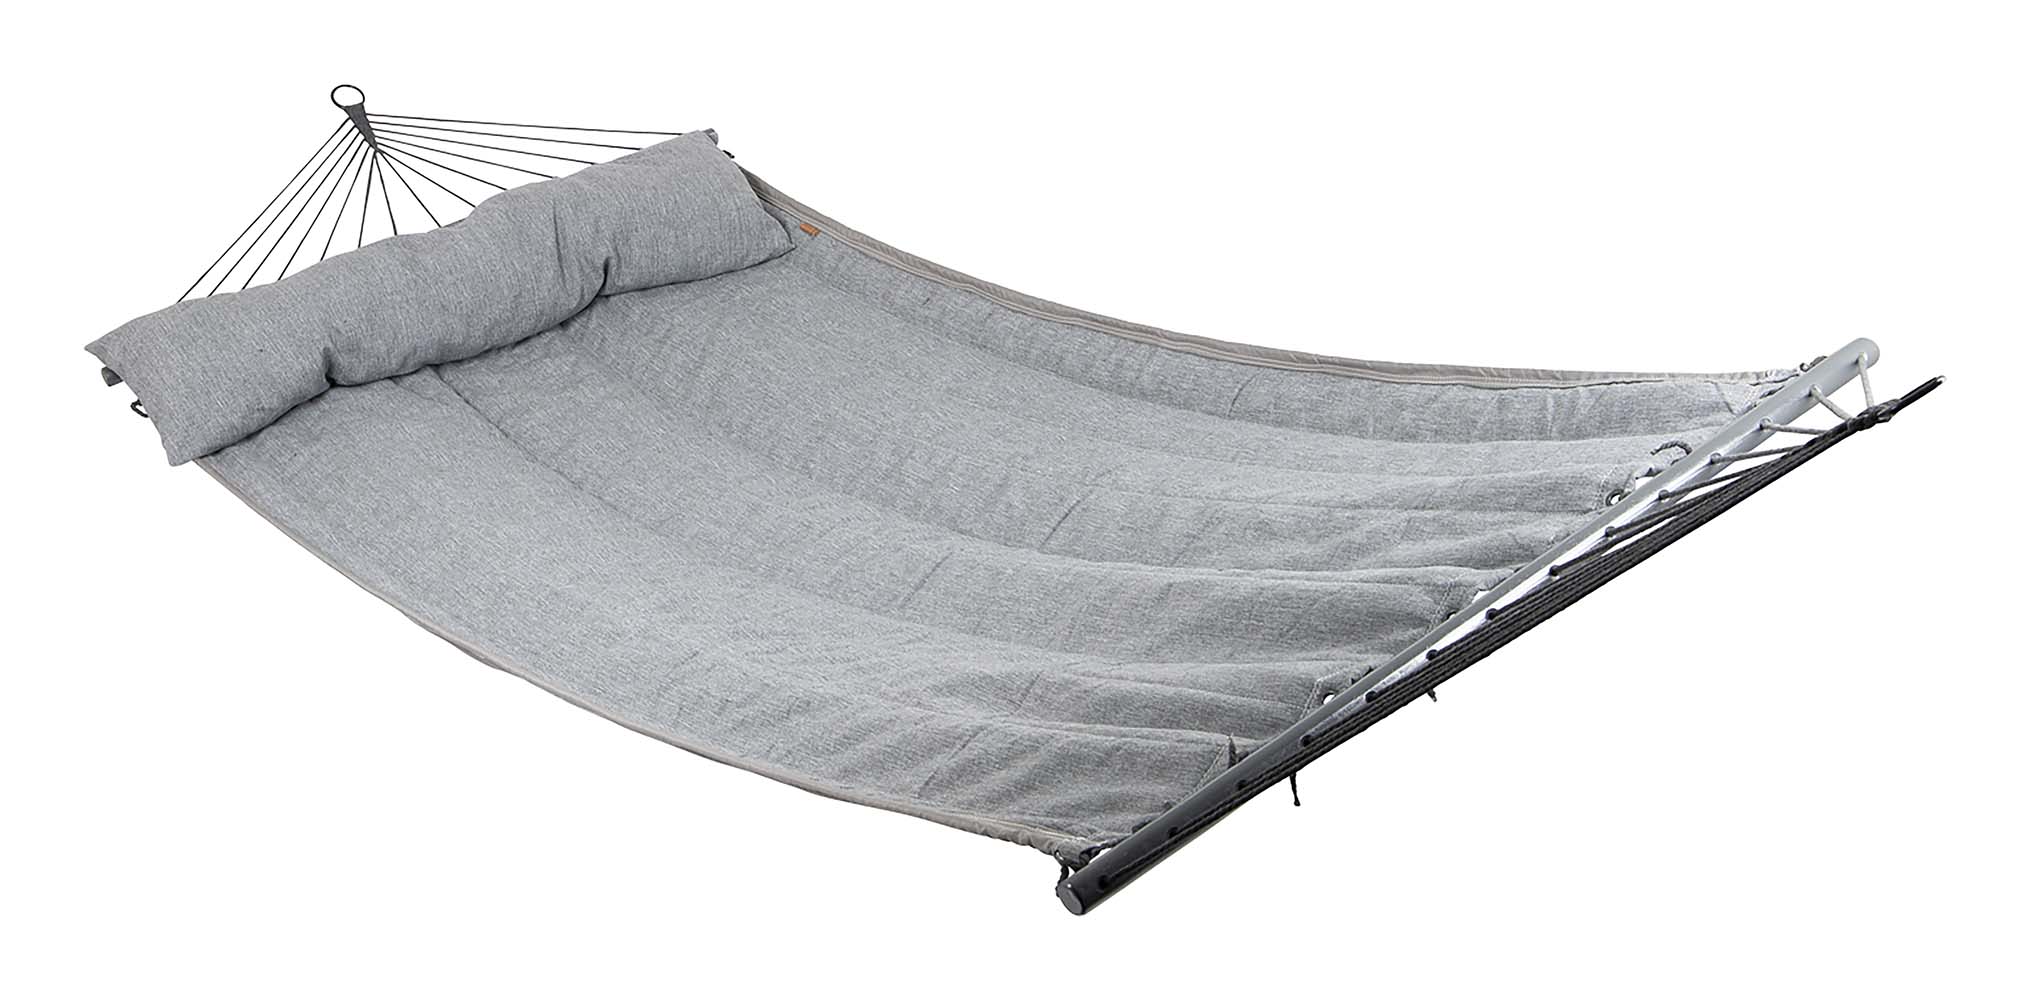 7100166 A luxurious and sturdy padded hammock with a robust fabric from the Urban Outdoor collection. The fabric on top is made of olefin and the bottom of Polyester. The hammock has a pole of 118 cm. The lying surface remains completely open. Also, the hammock has a pillow for more comfort.